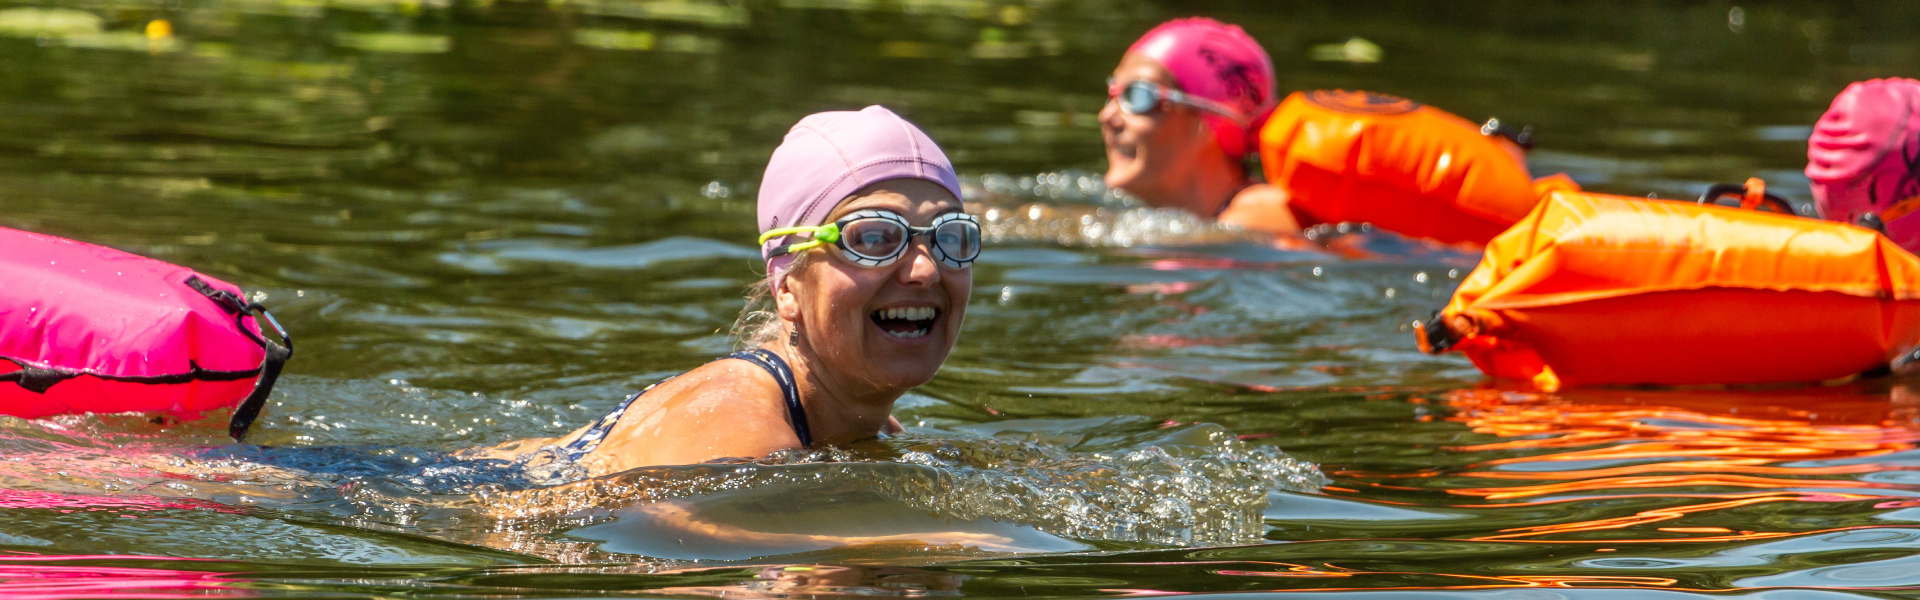 10 Reasons to take up Open Water Swimming!